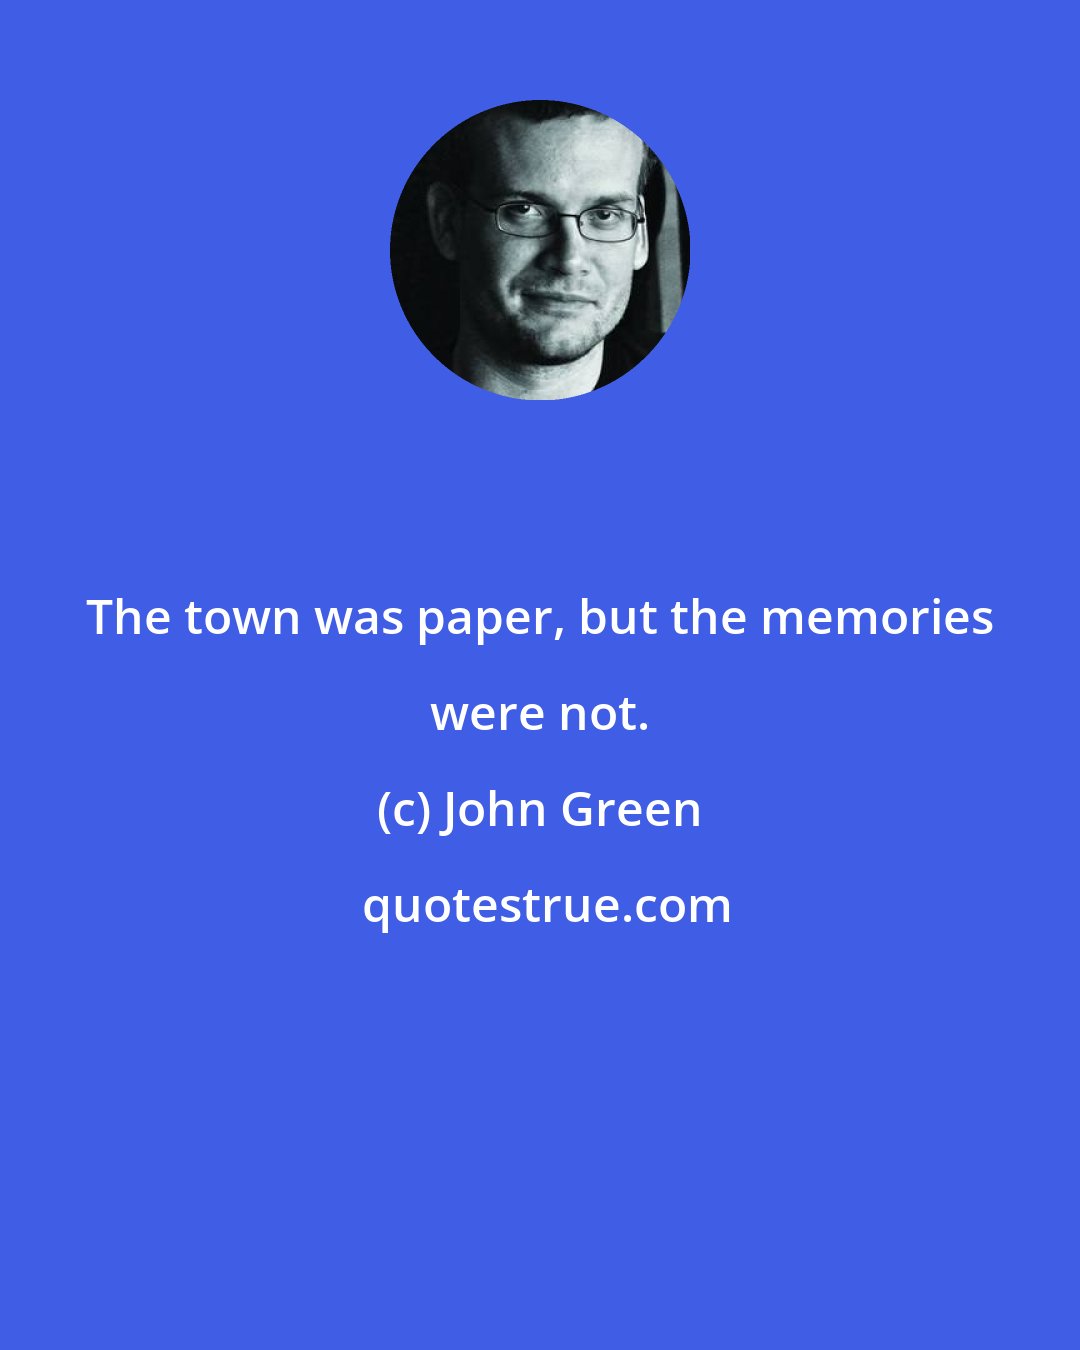 John Green: The town was paper, but the memories were not.